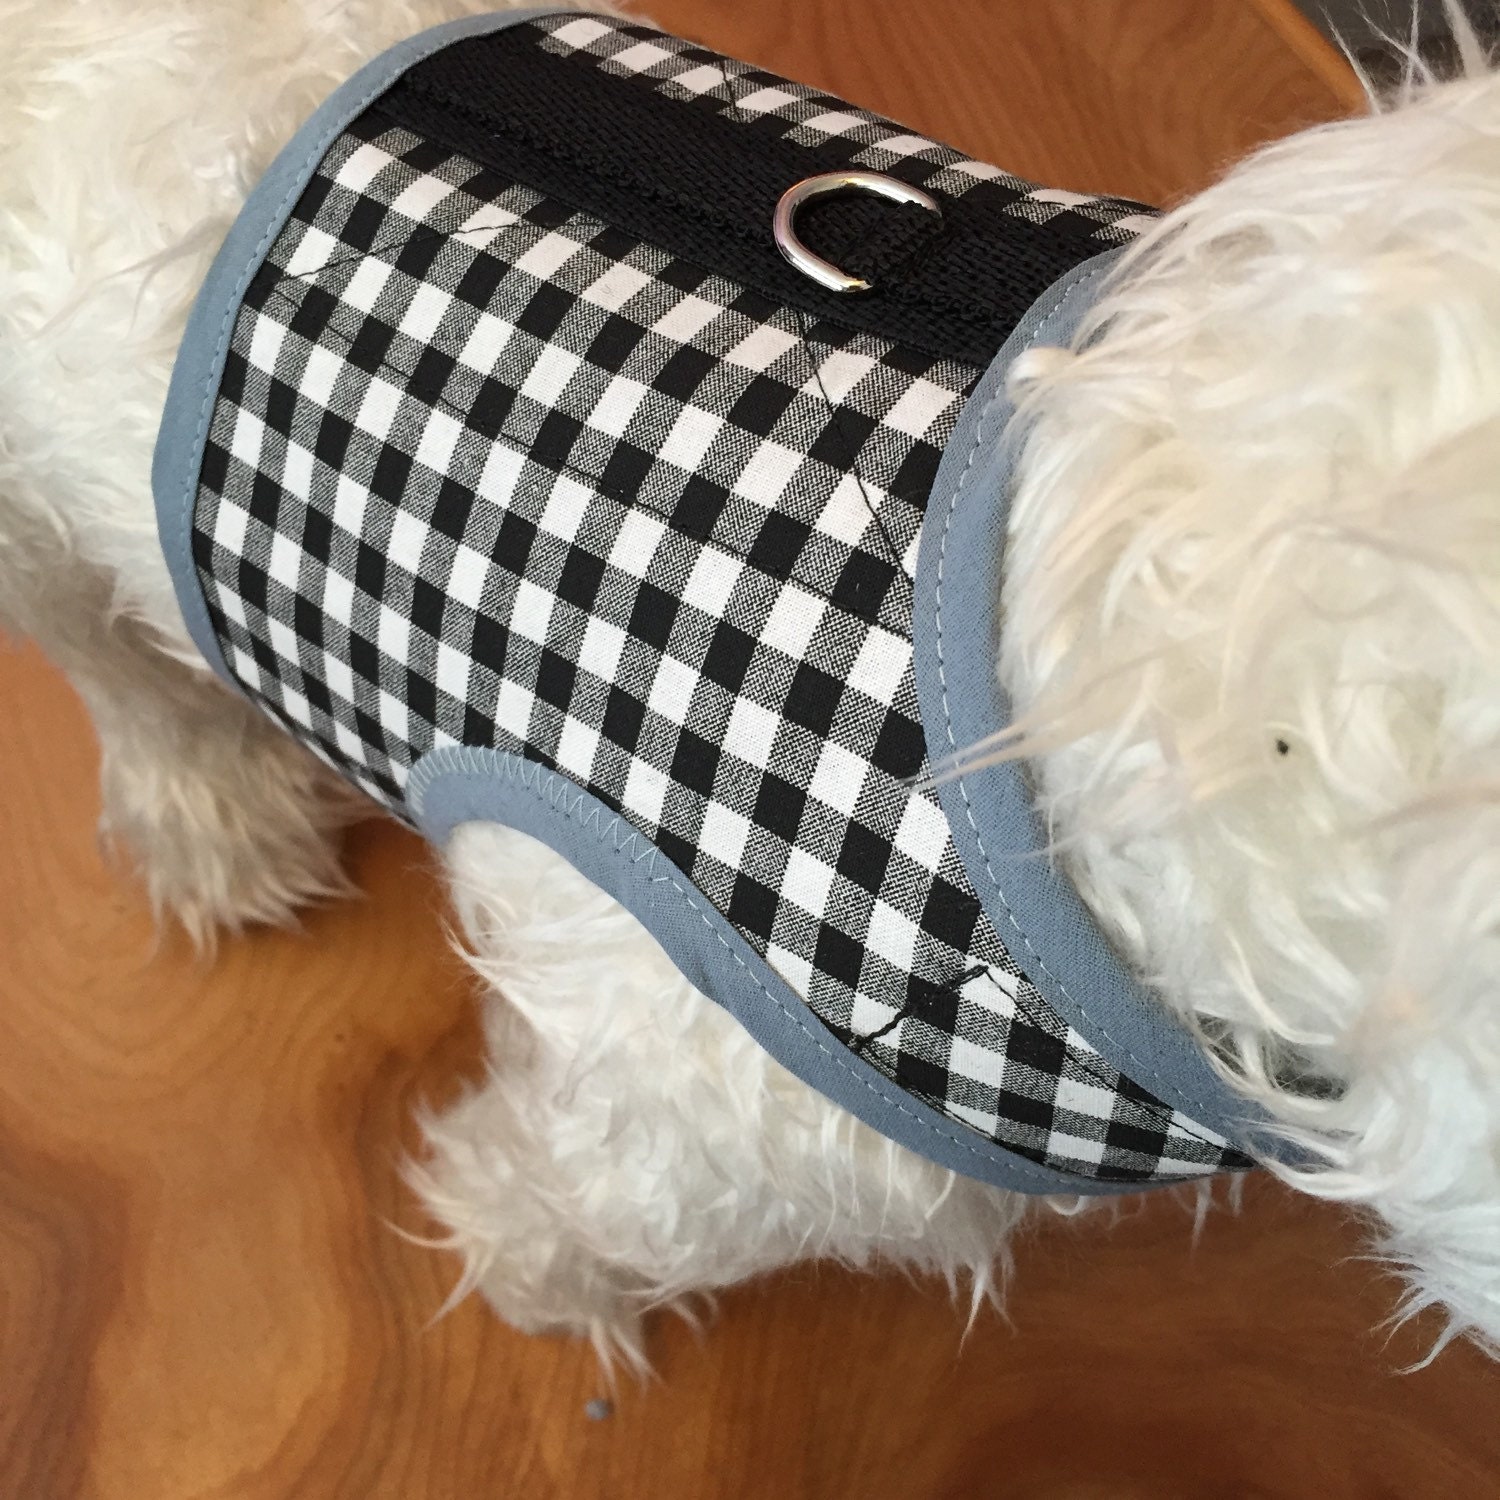 New Gingham Small Dog Harness Black and White Check Made in - Etsy